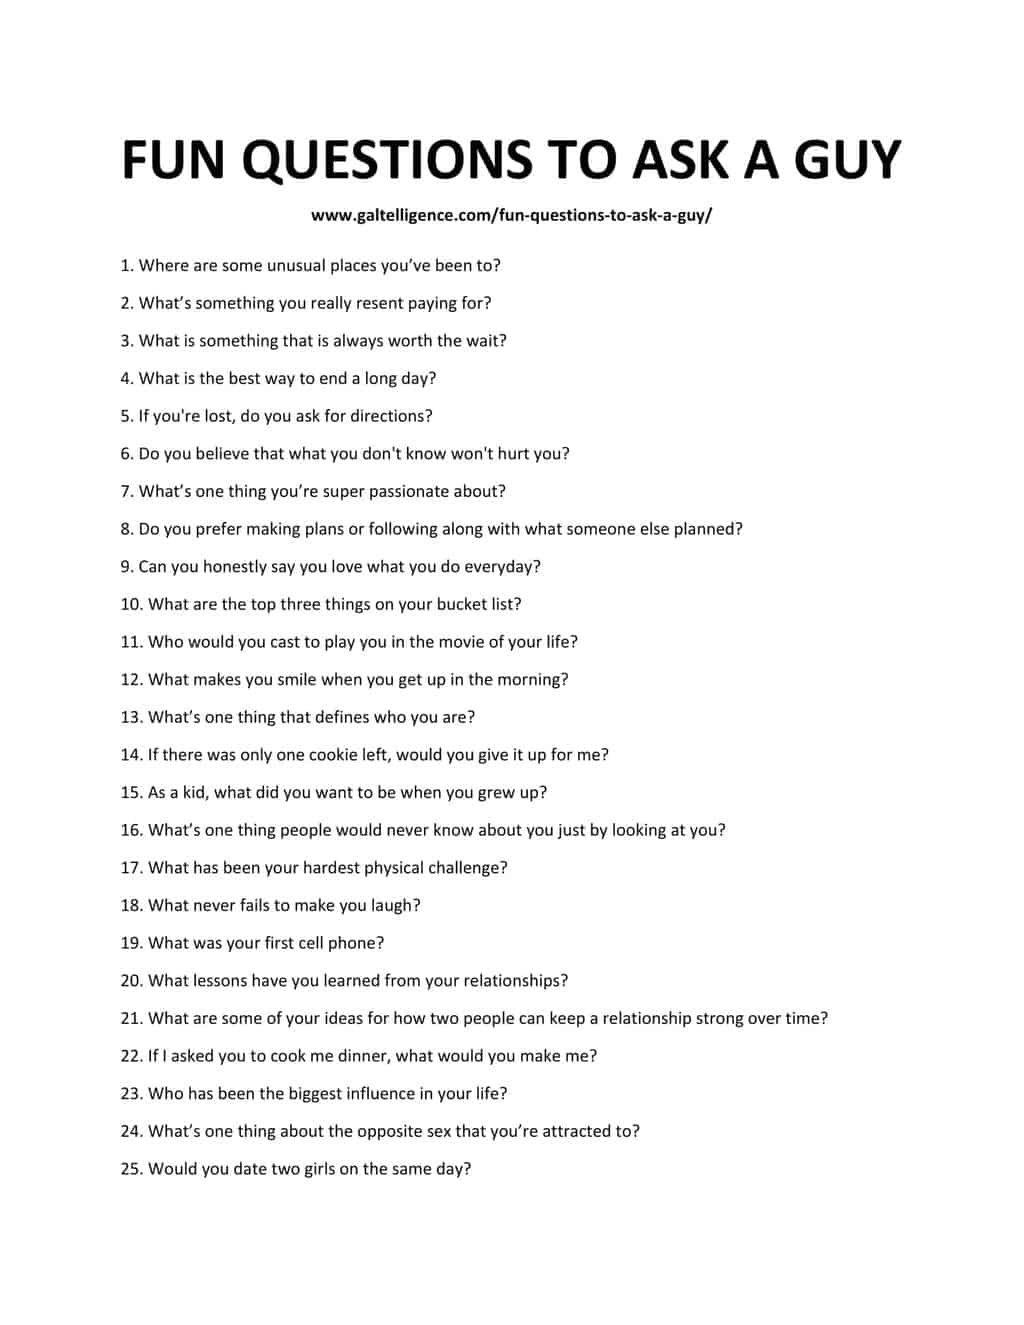 70 Fun Questions To Ask A Guy - Spark cool conversations.